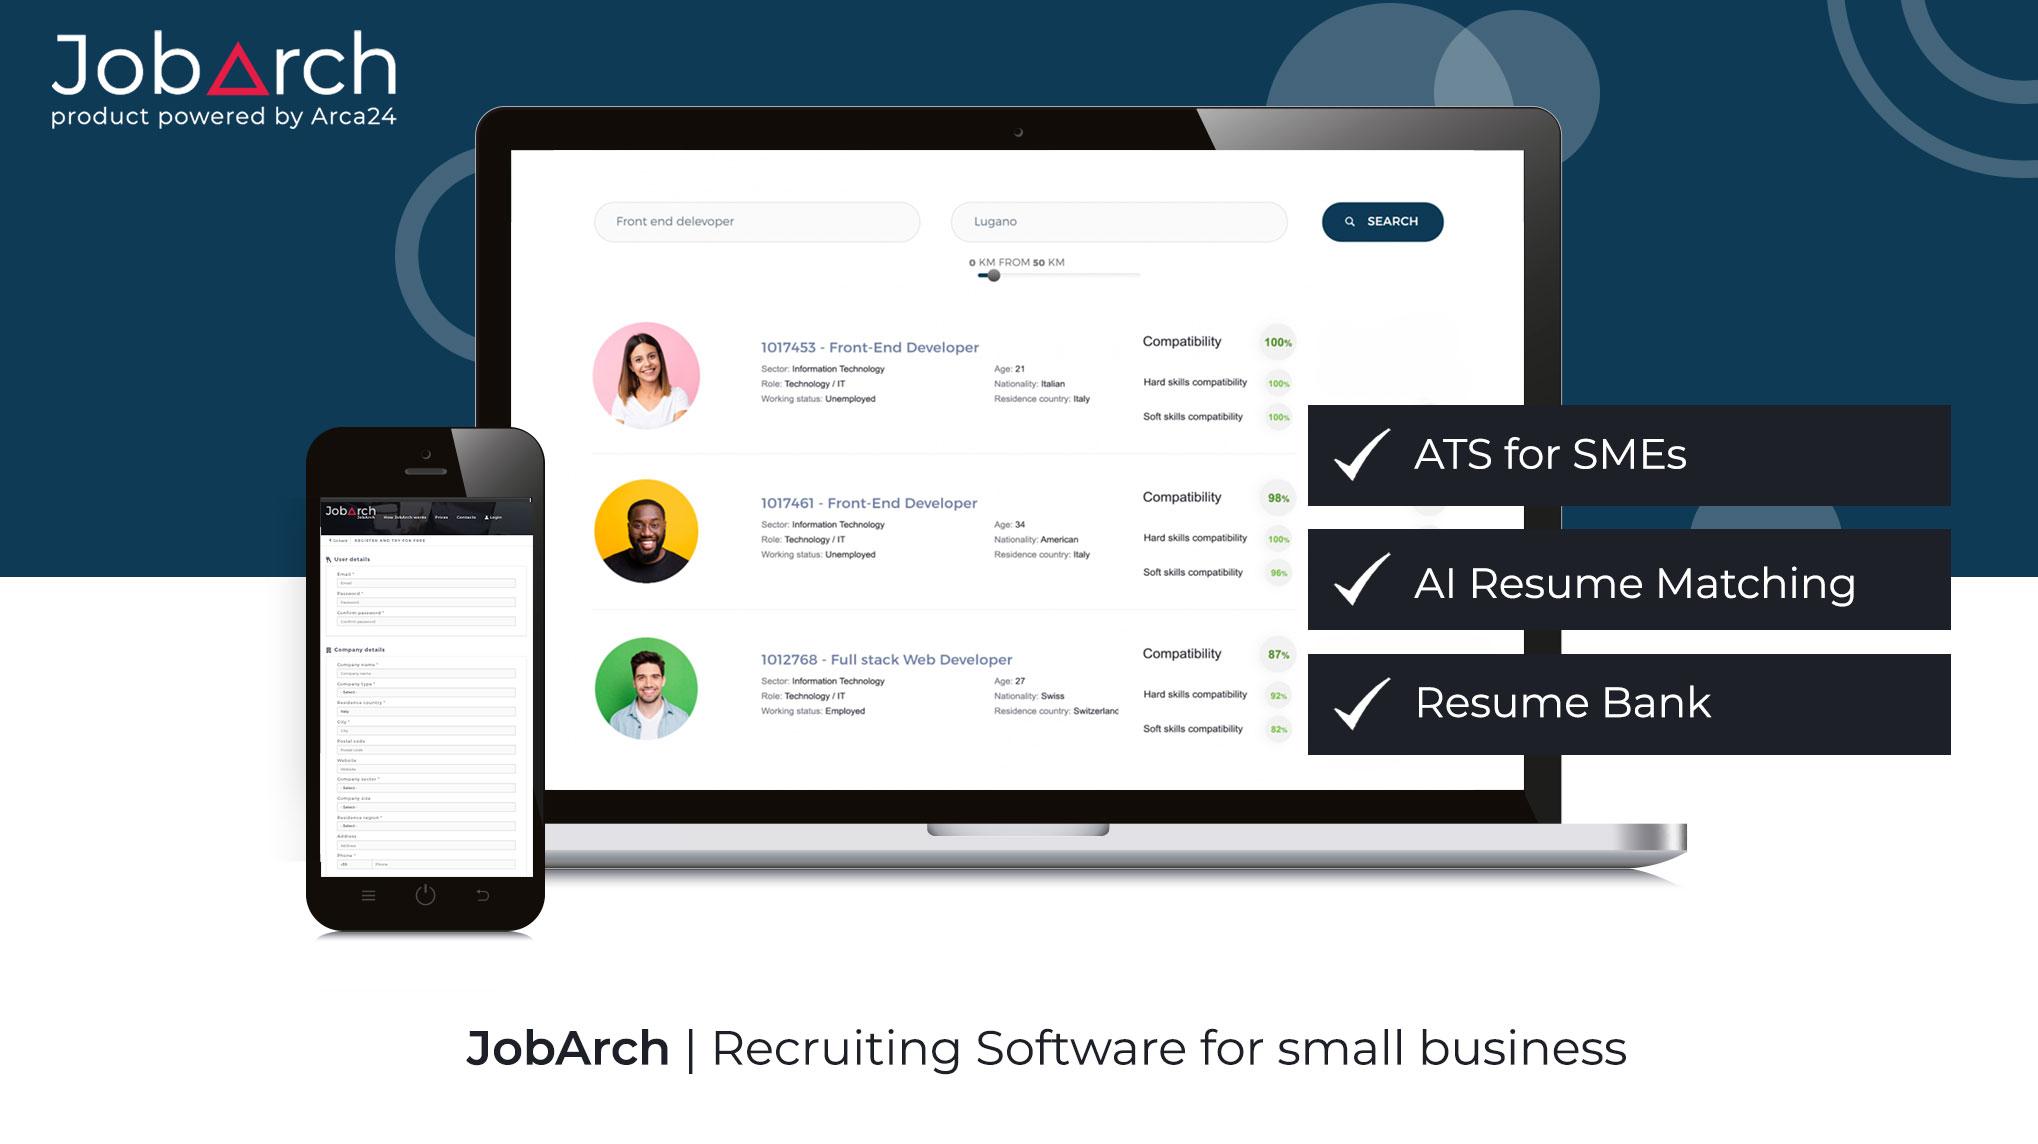 An easy-to-use Applicant Tracking System. Fast and efficient recruitment and selection of candidates.